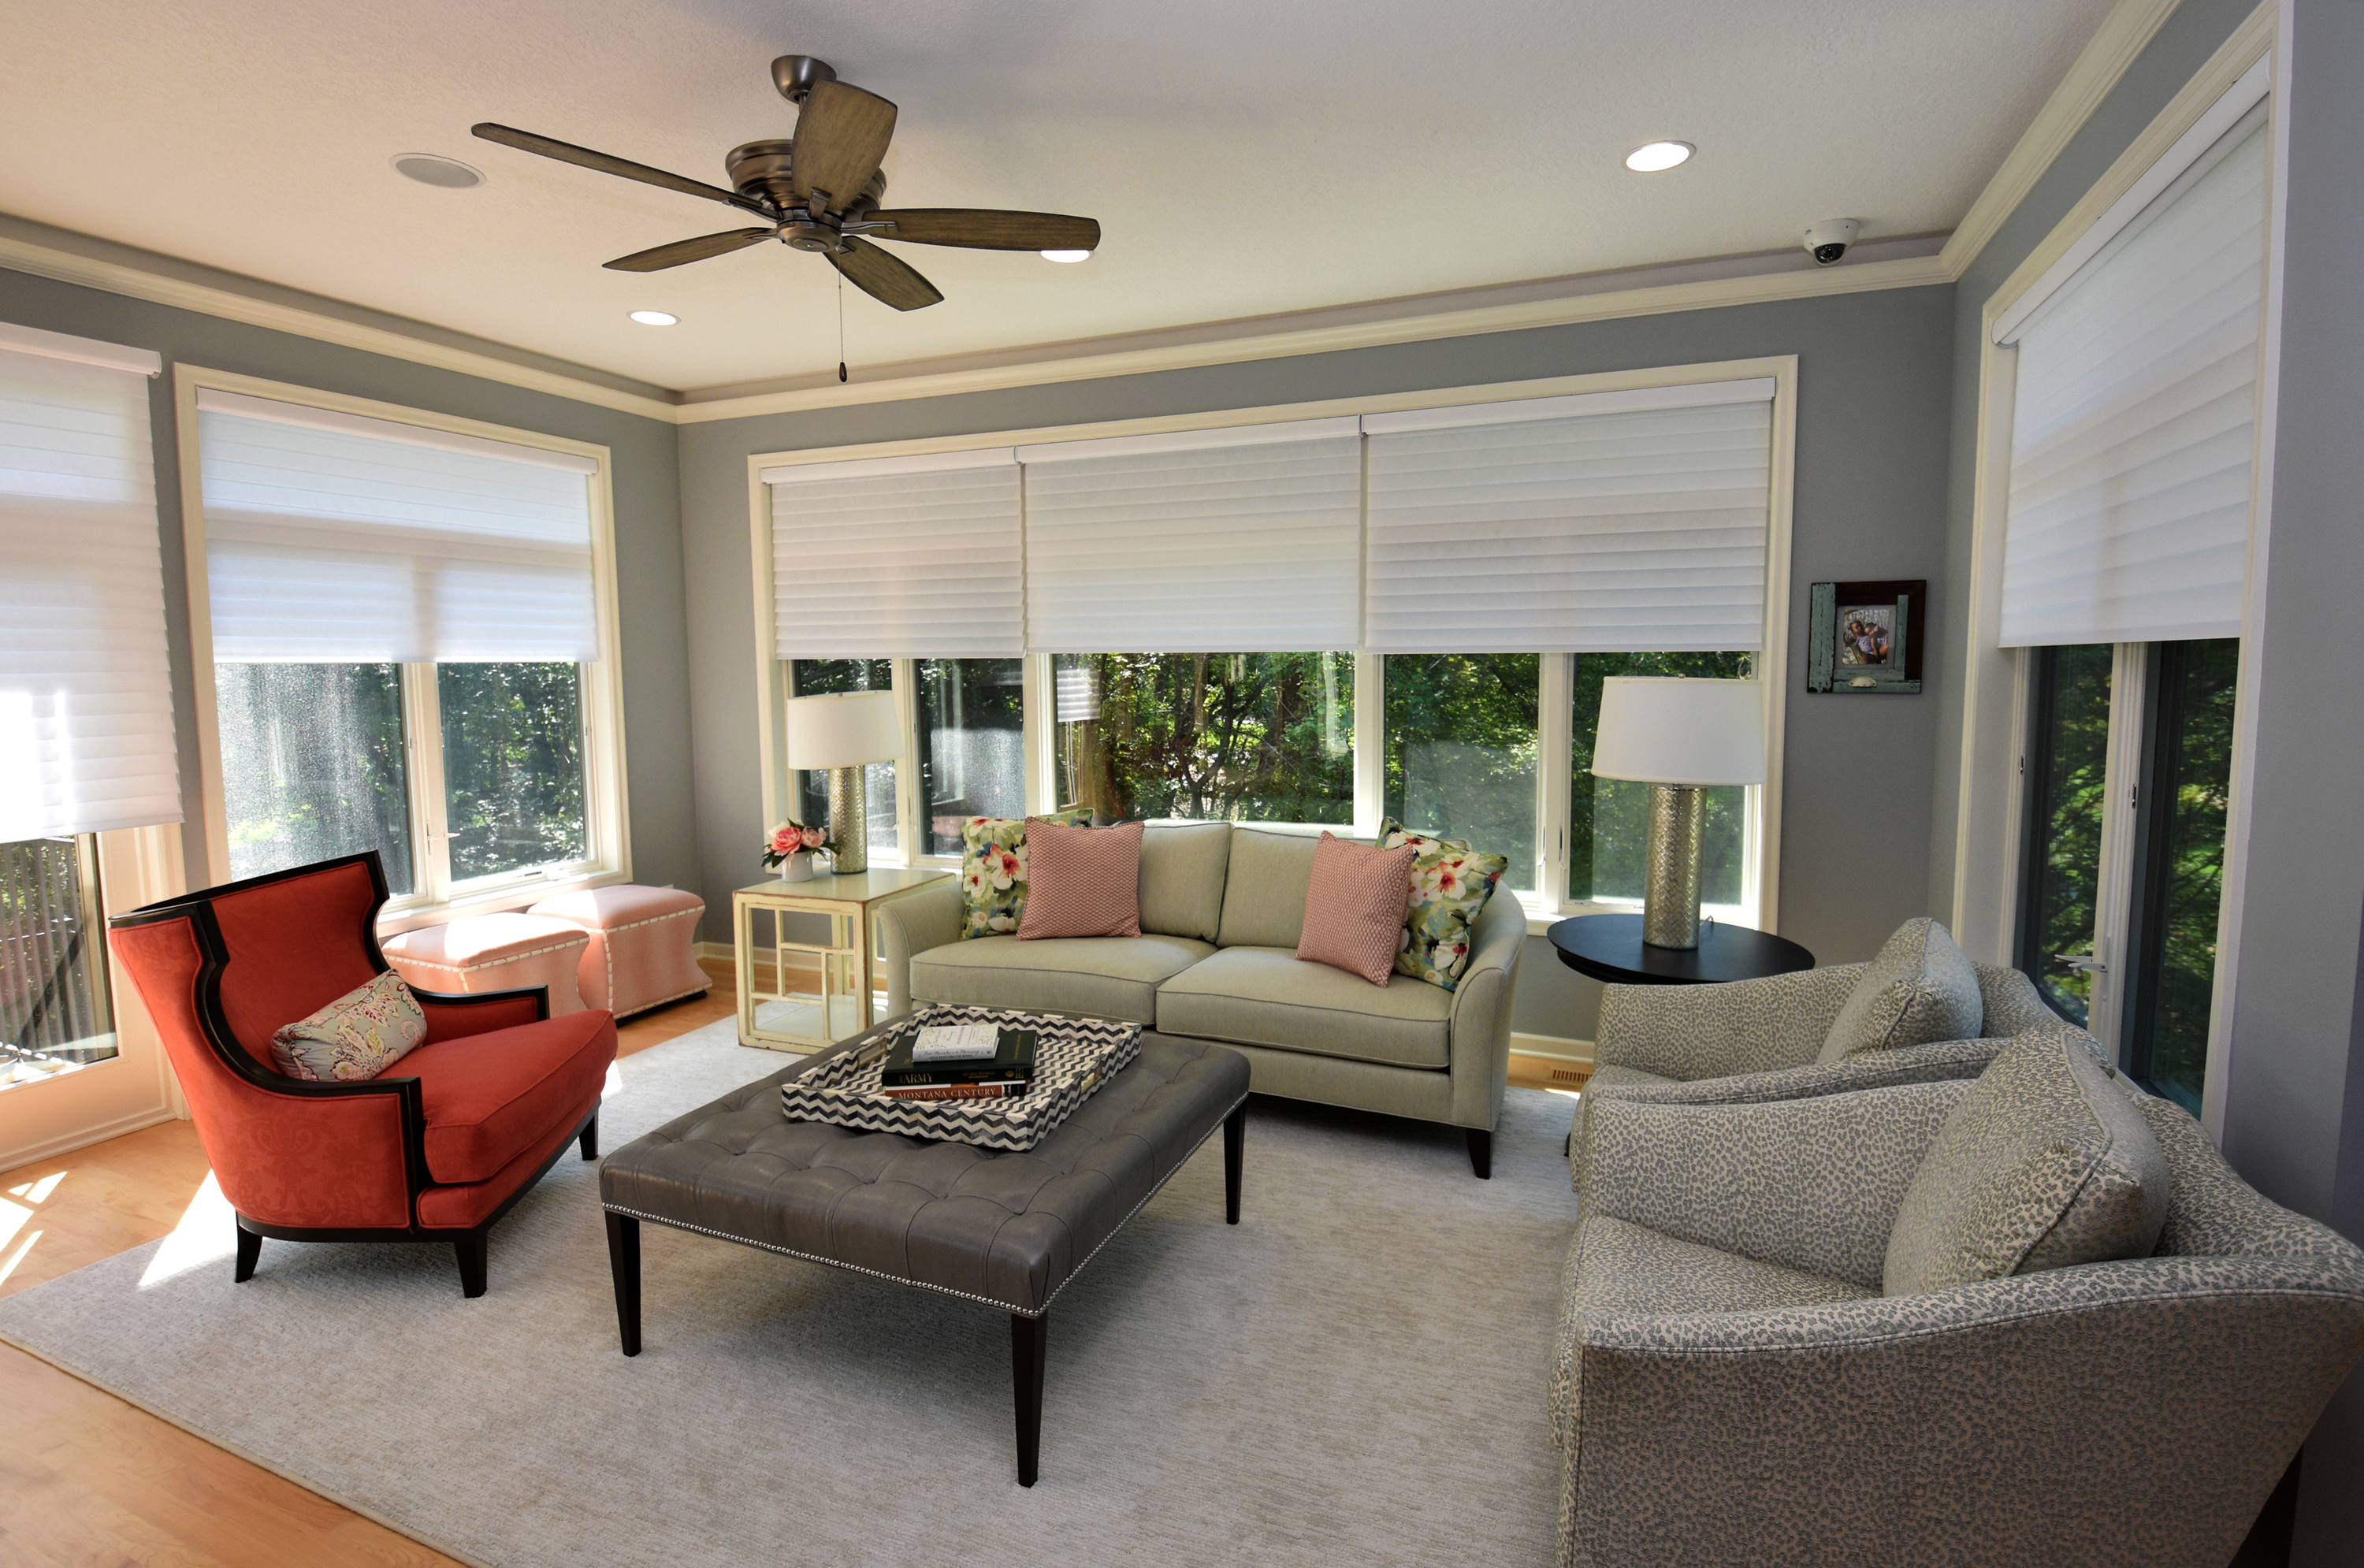 Automatic blinds inside home addition